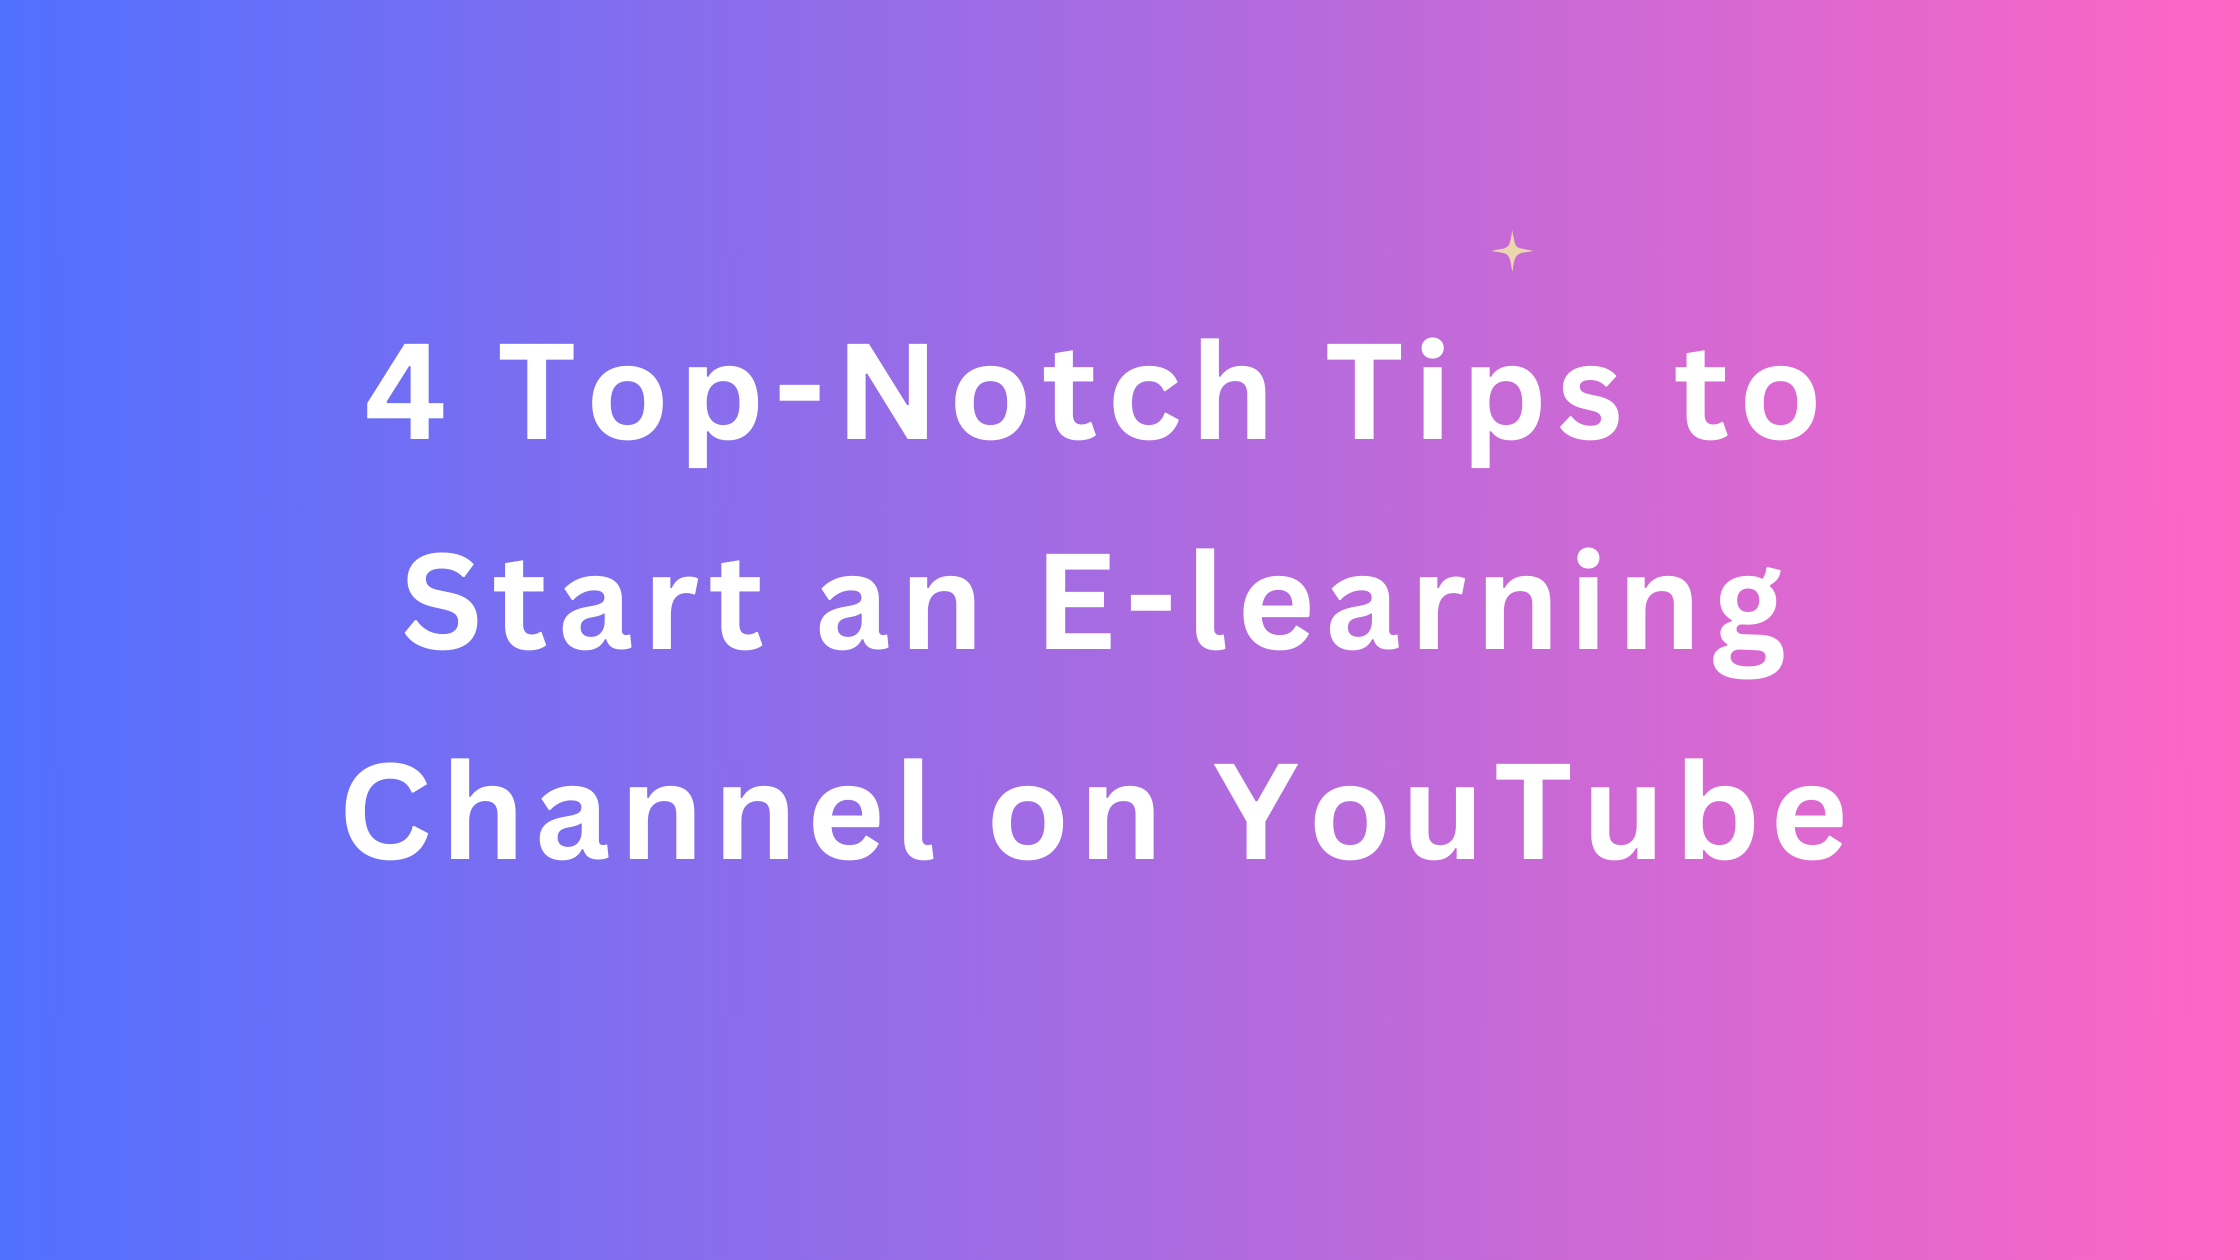 4 Top-Notch Tips to Start an E-learning Channel on YouTube